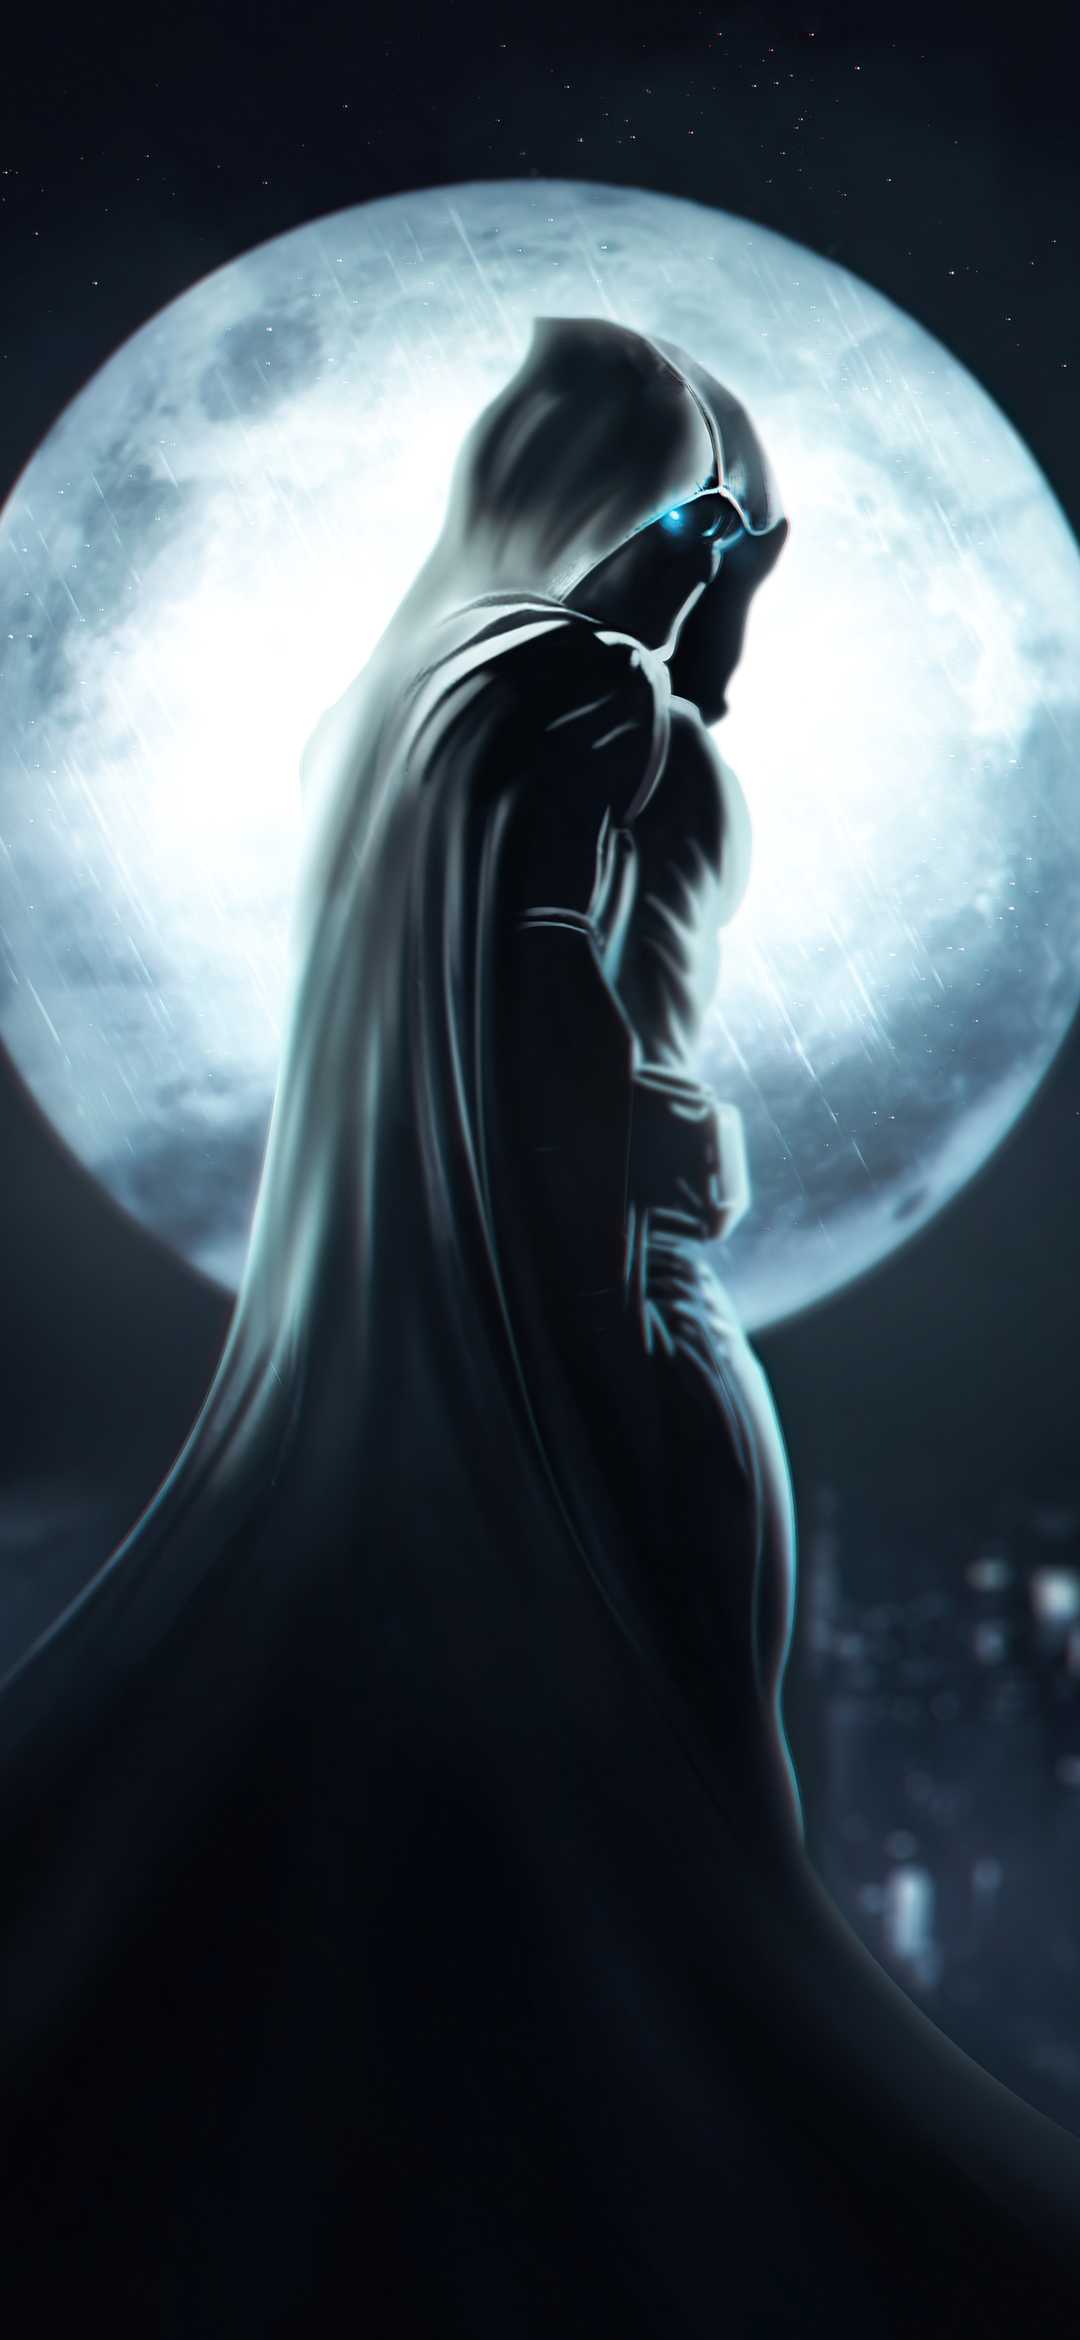 Free download Moon Knight Wallpapers Top 35 Best Moon Knight Backgrounds  Download 1080x1920 for your Desktop Mobile  Tablet  Explore 35 Moon  Knight Mobile Wallpapers  Moon Wallpapers Moon Wallpaper Moon Knight  Wallpaper